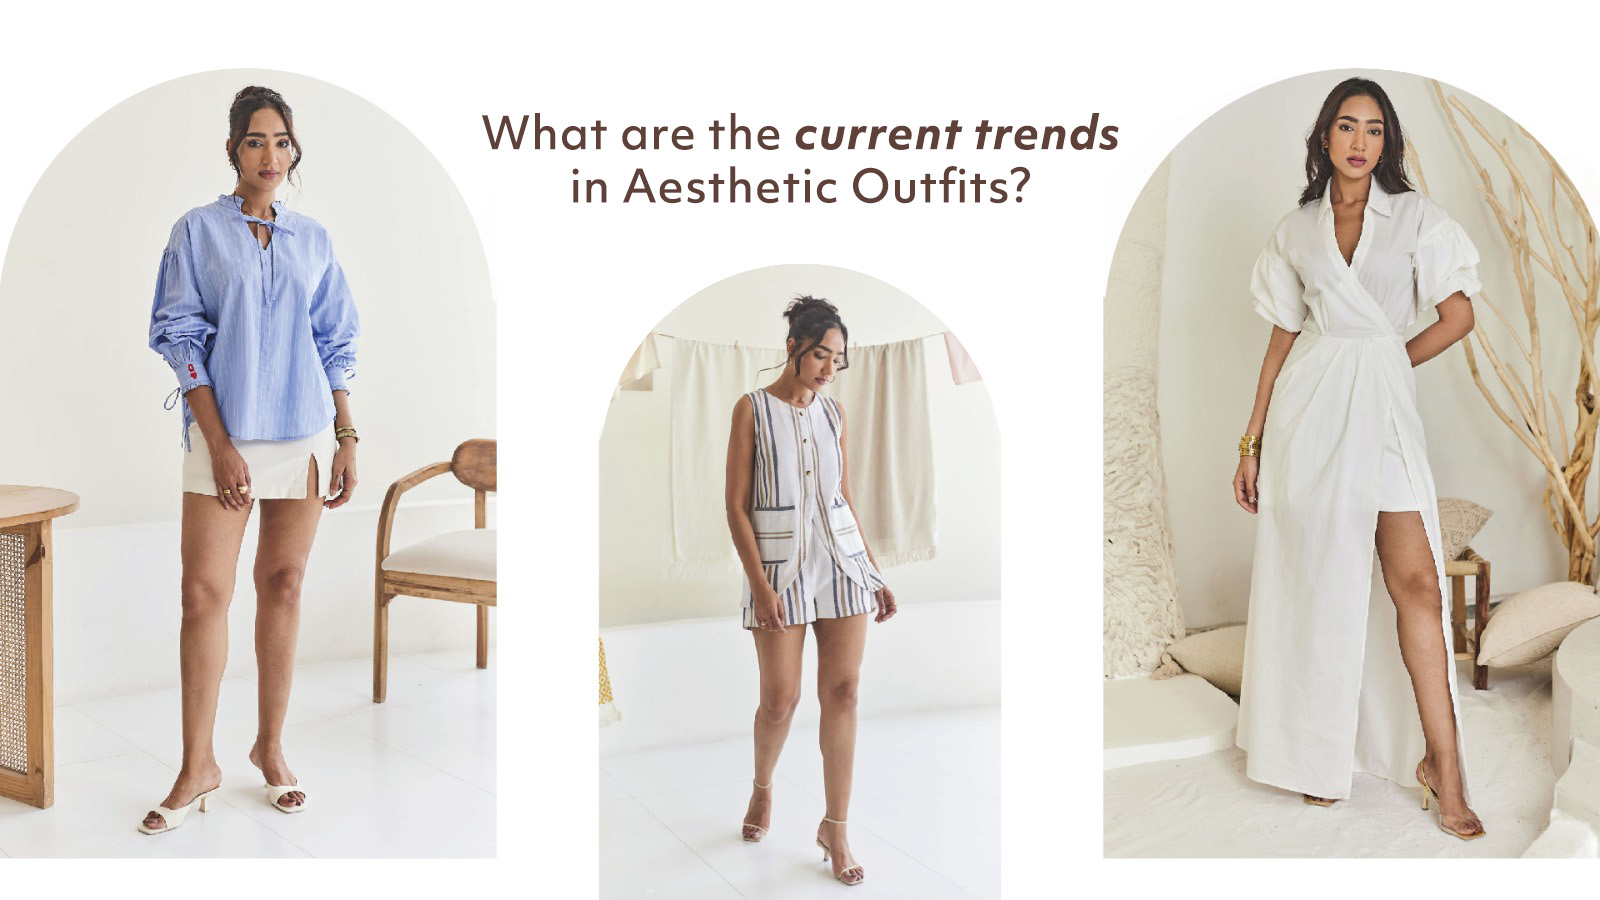 What are the current trends in Aesthetic Outfits?